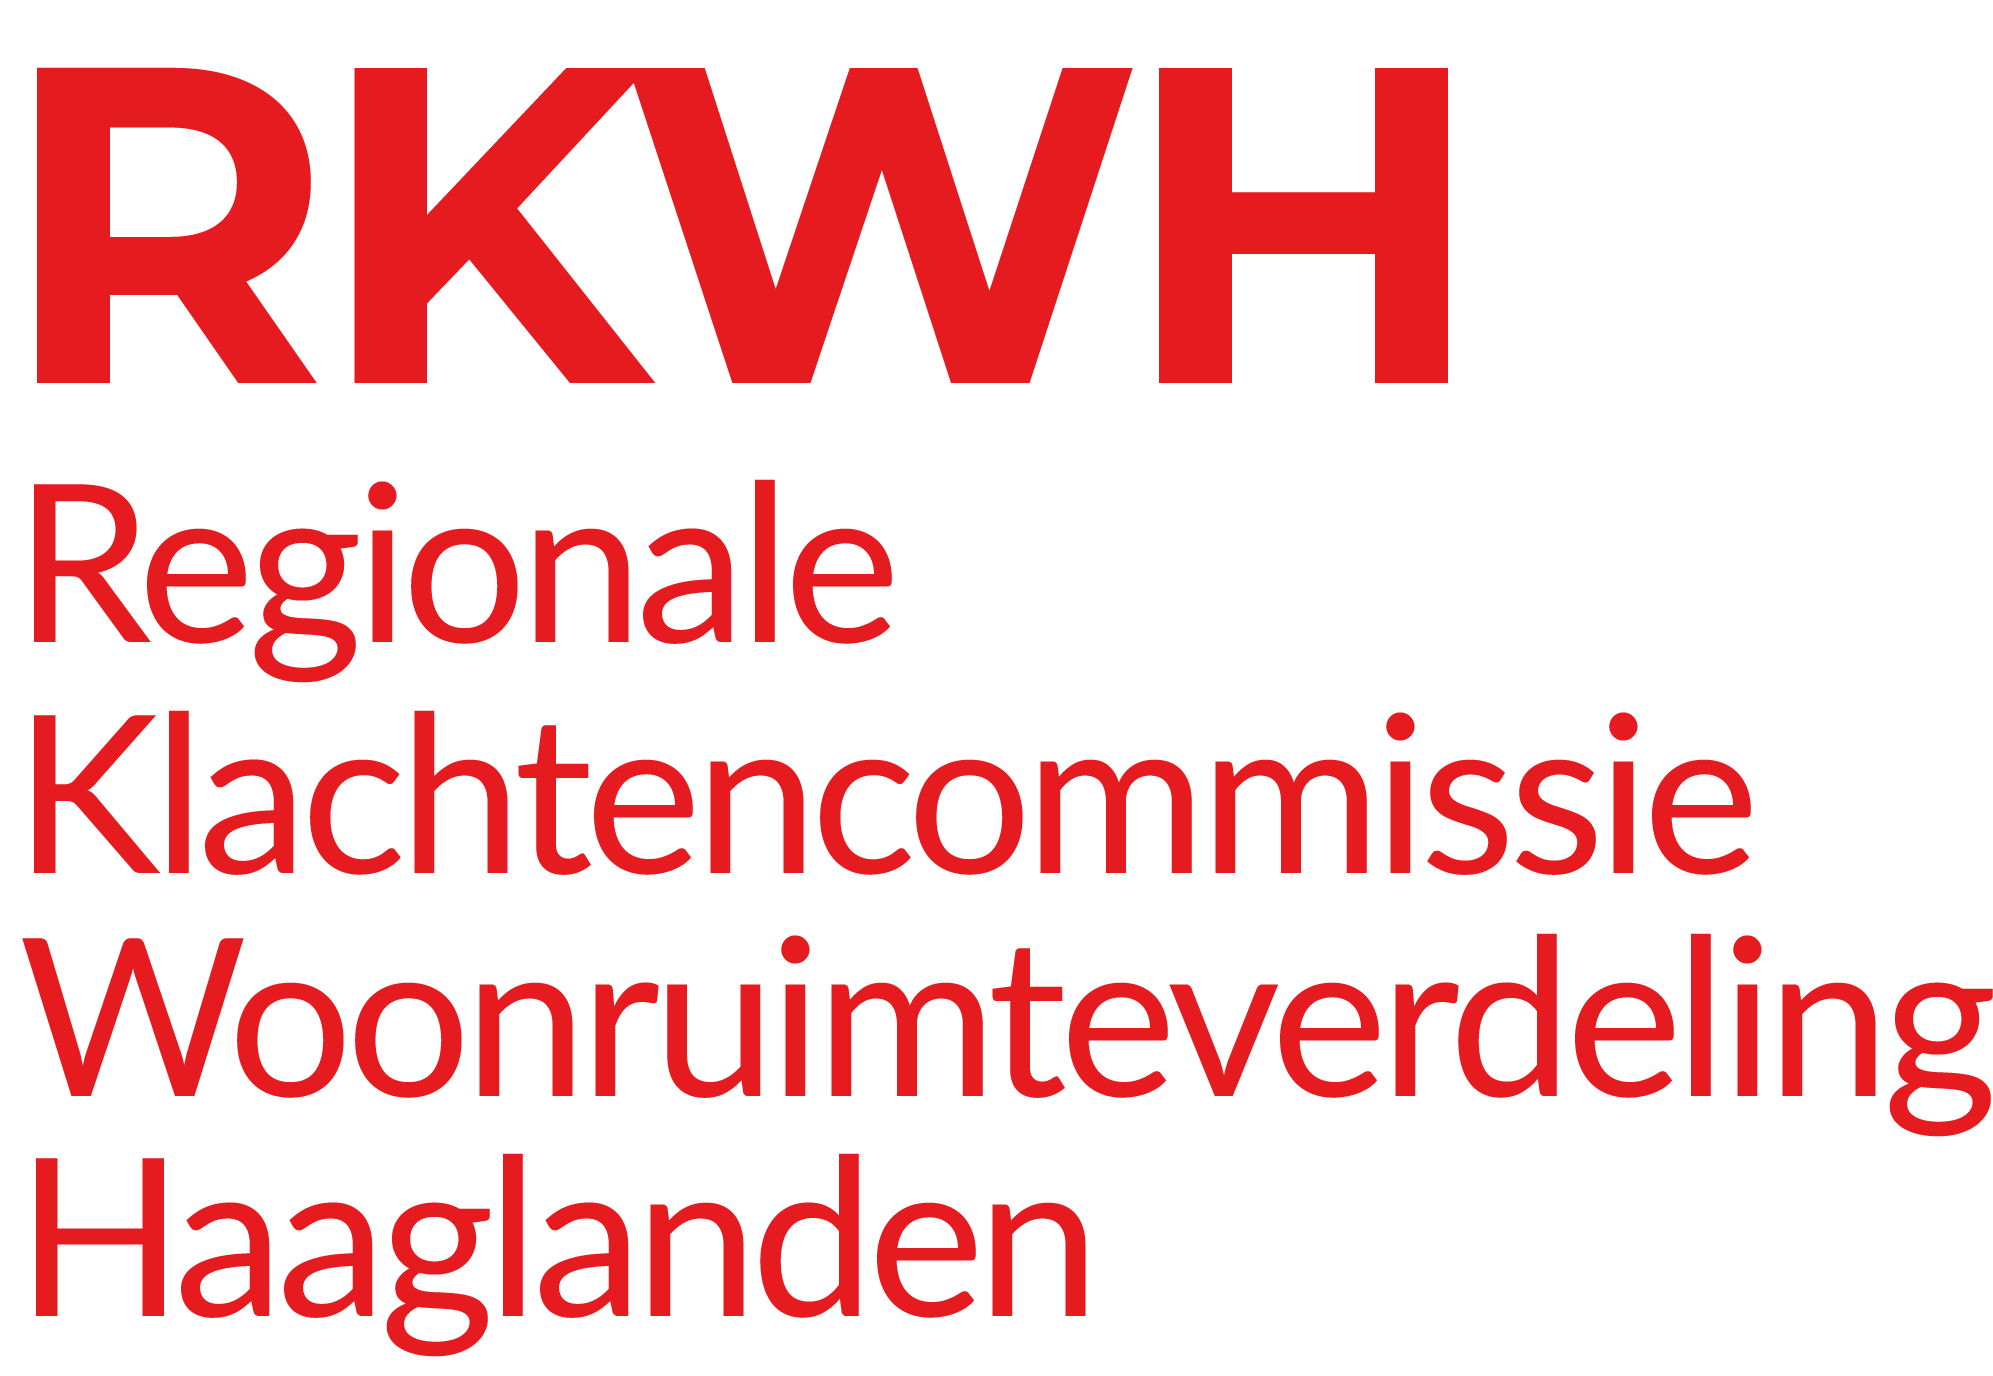 RKWH